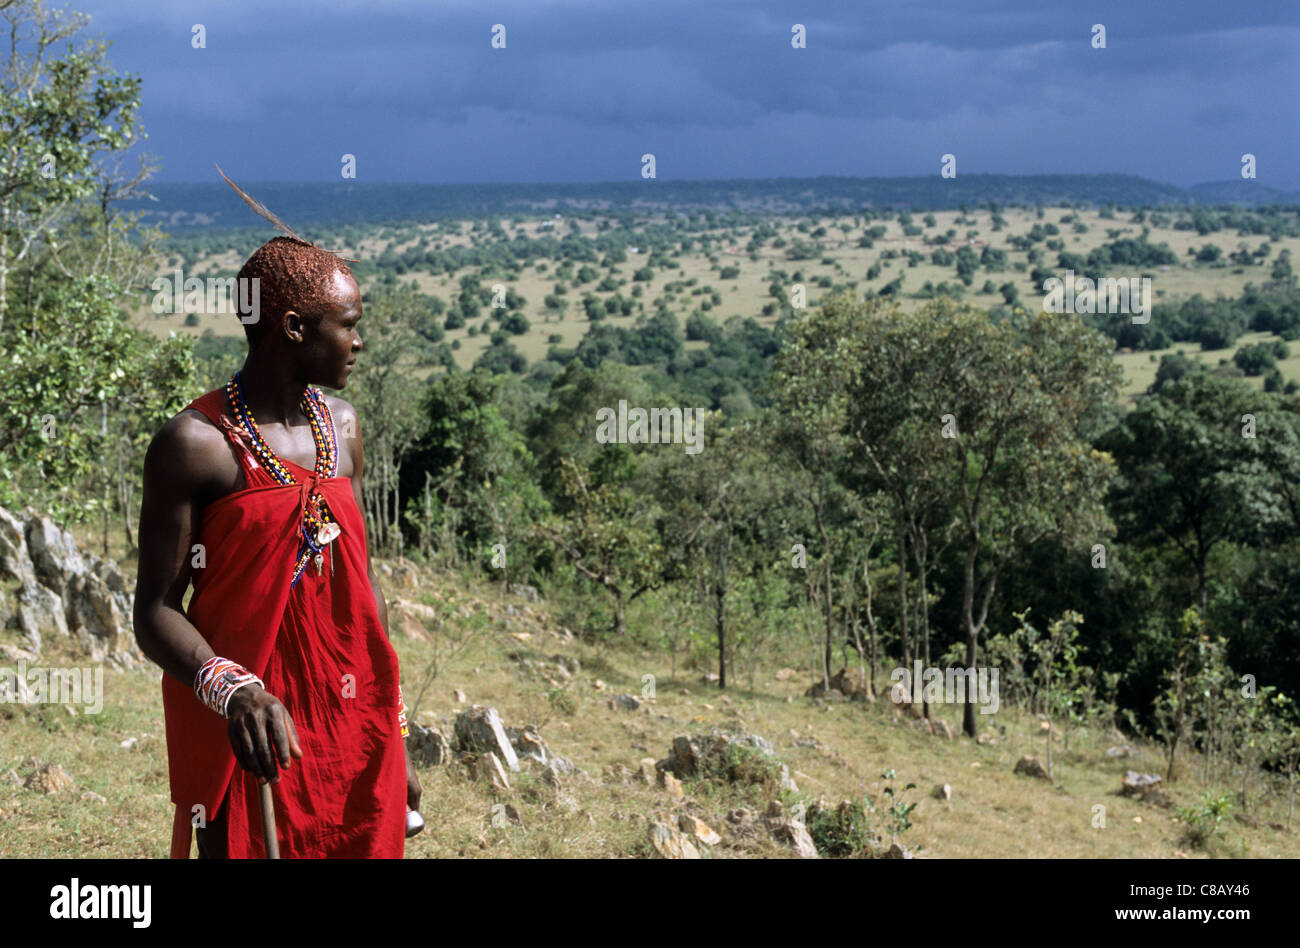 Kenya, Africa. Siria Maasai; moran warrior with red ochre hairstanding on a hill looking out over the countryside. Stock Photo